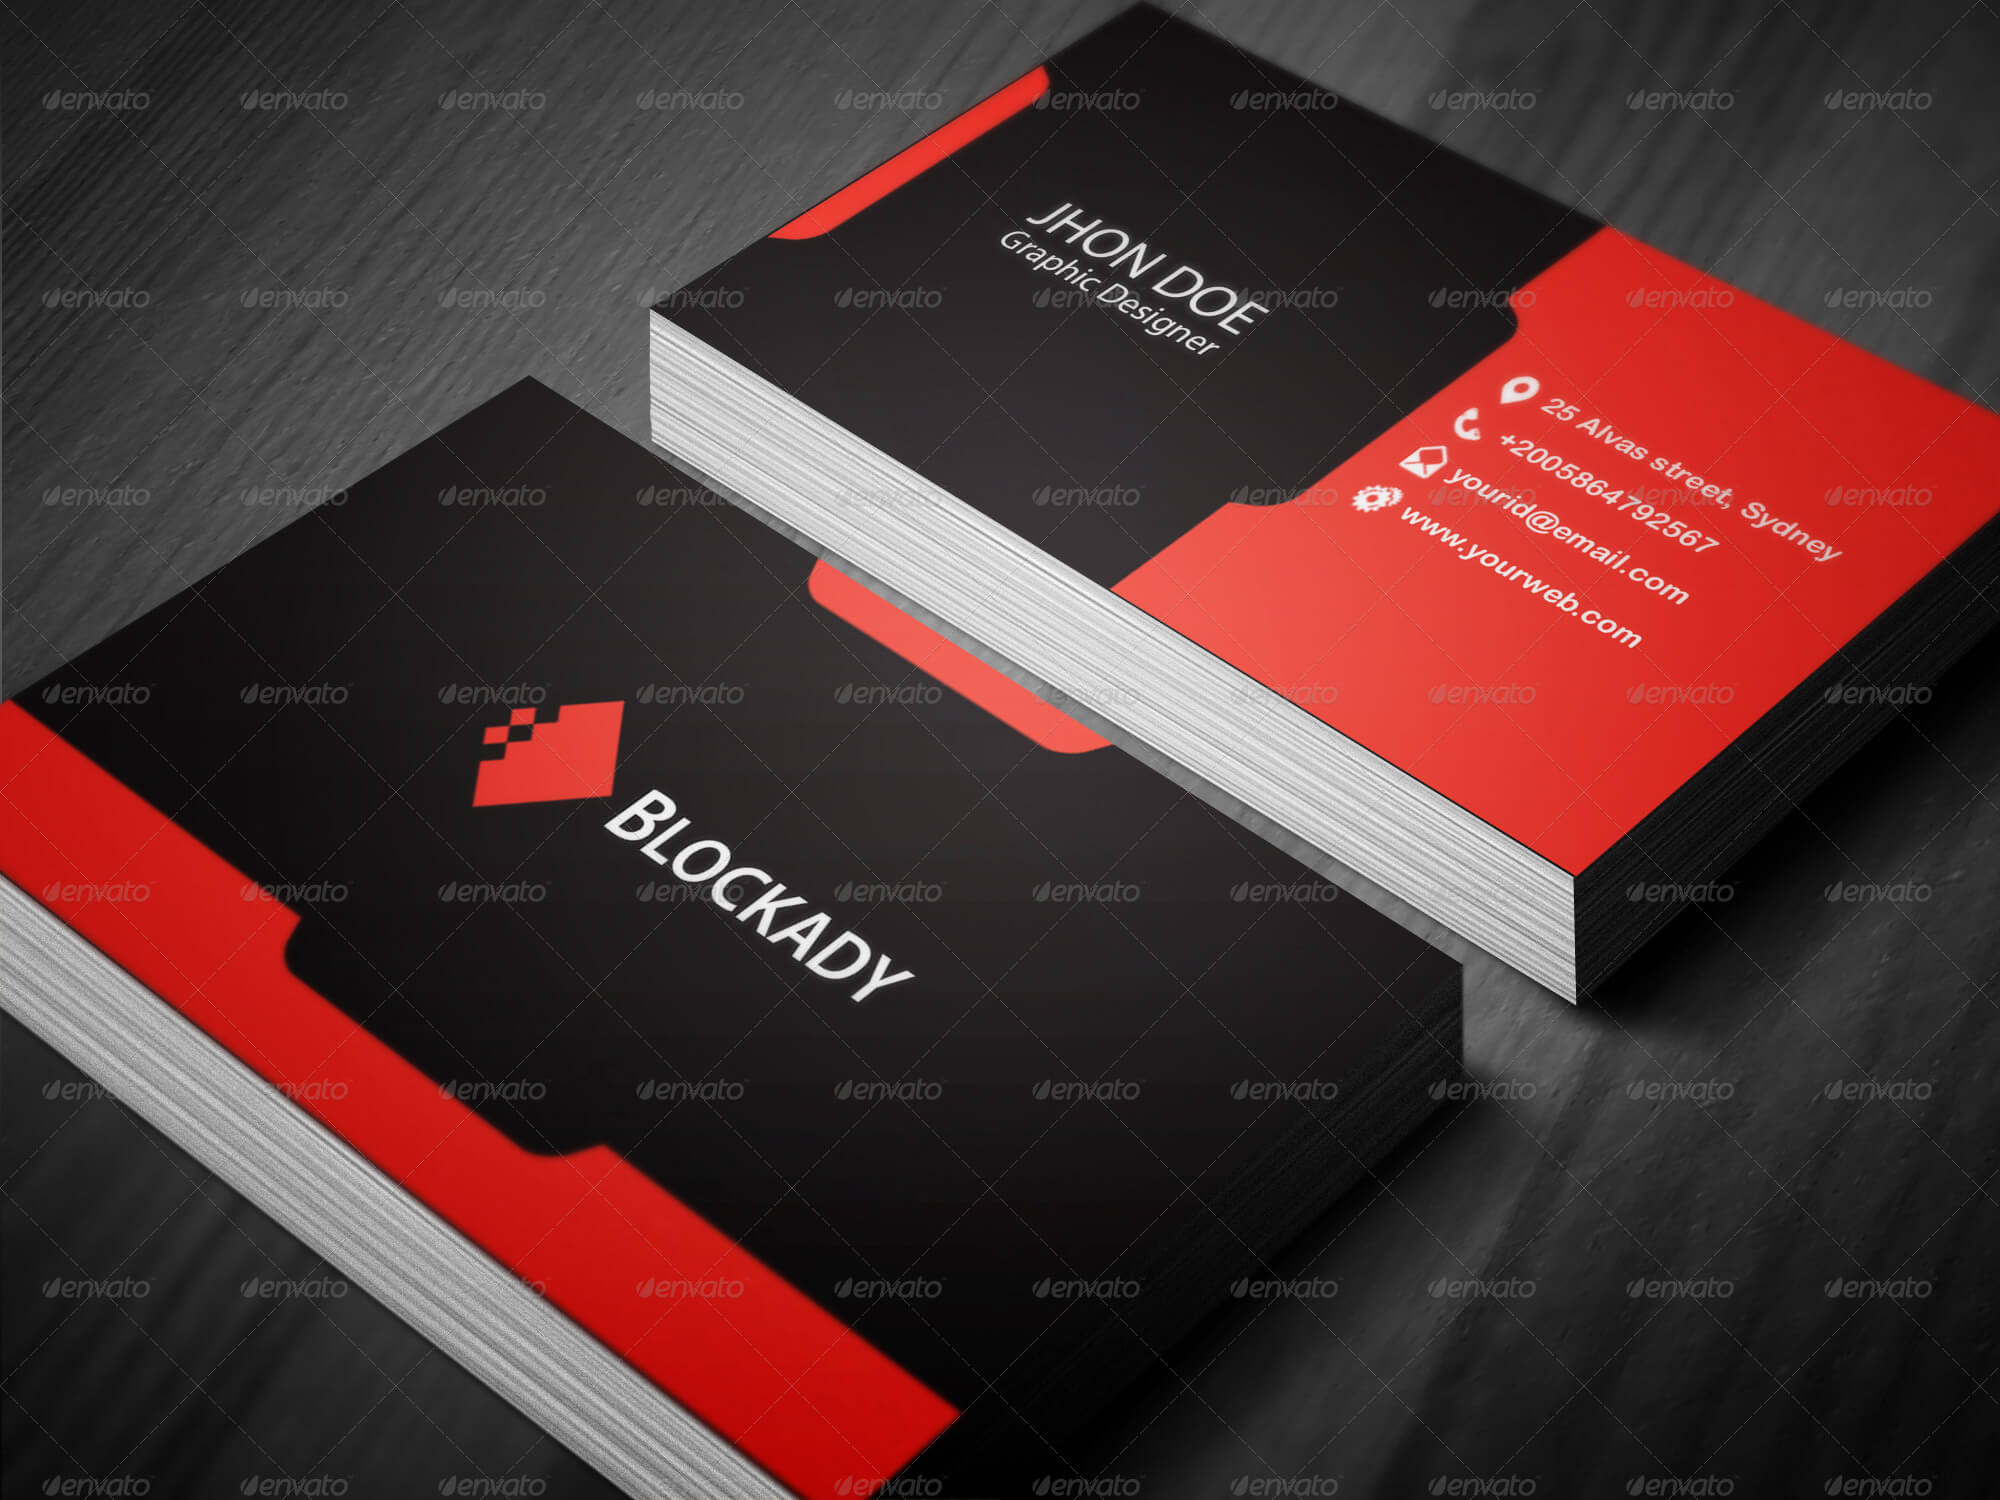 2 Colors Creative Business Card Template V.2Kazierfan For Web Design Business Cards Templates